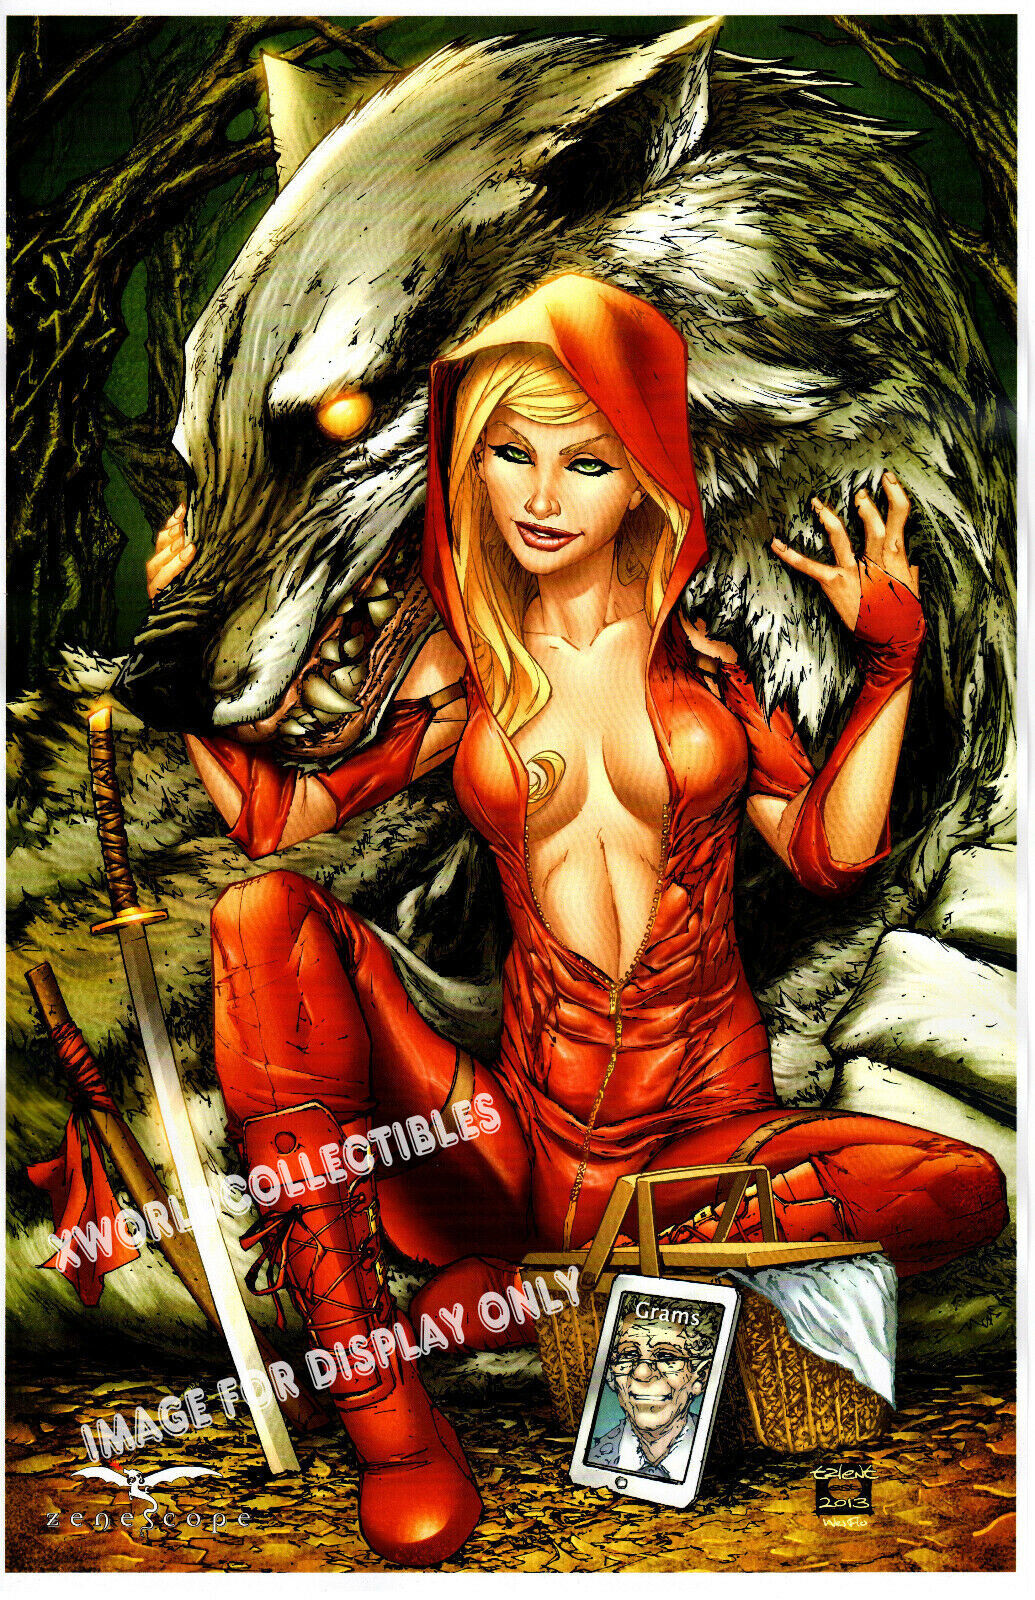 GRIMM FAIRY TALES CODE RED #1 HOT-N-SEXY  ART PRINT By TALENT CALDWELL 11x17